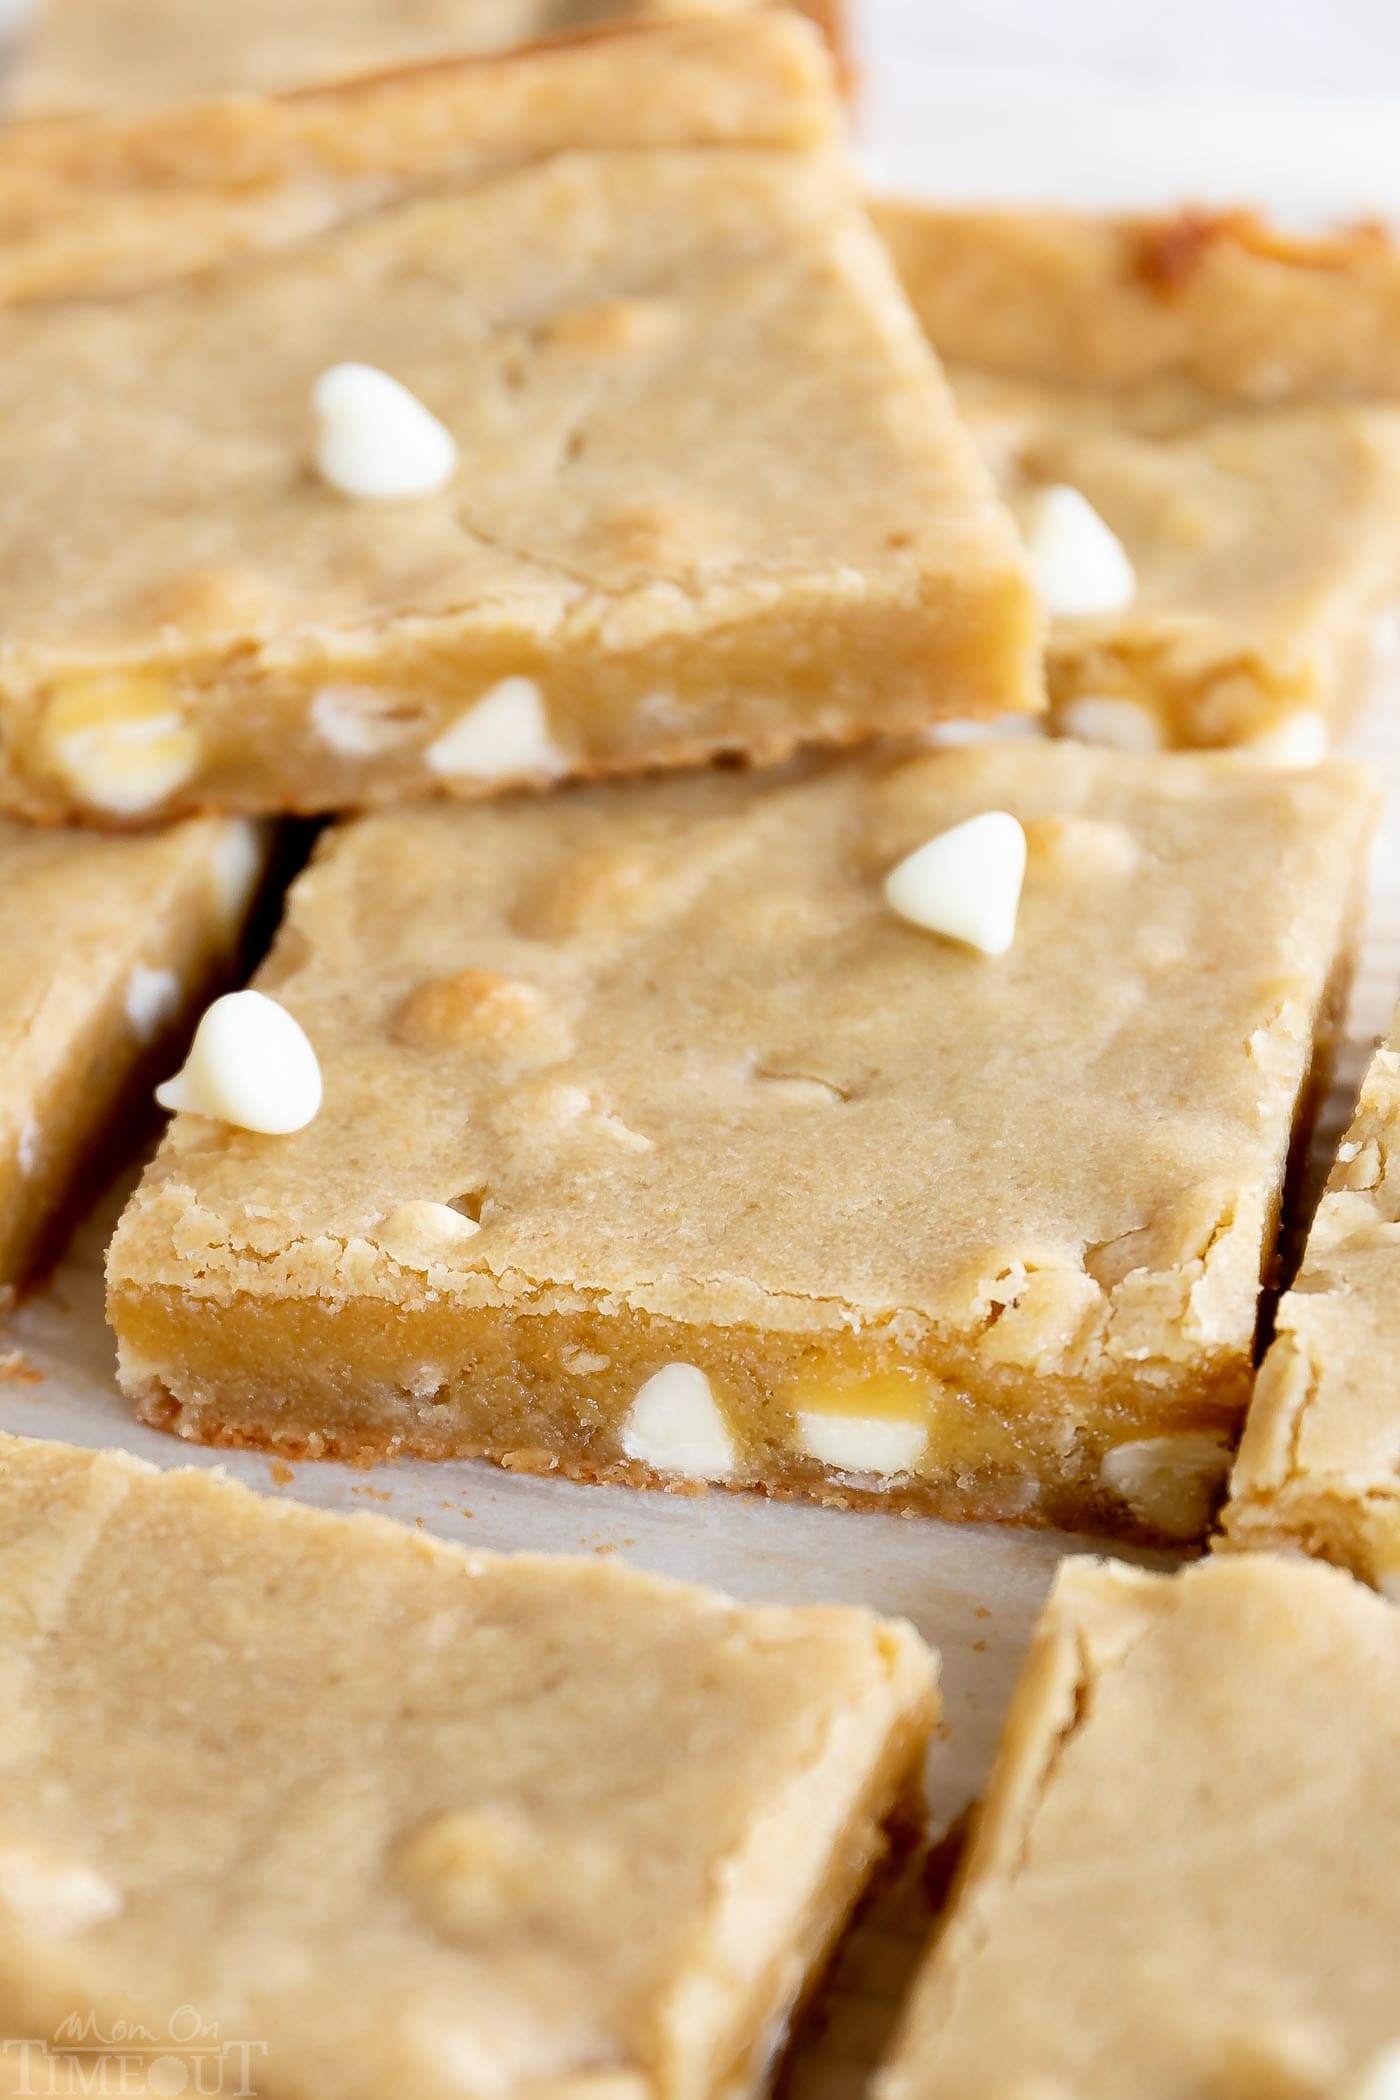 blondies made with white chocolate chips are cut into squares and sitting on white parchment. one blondie is sitting on top.